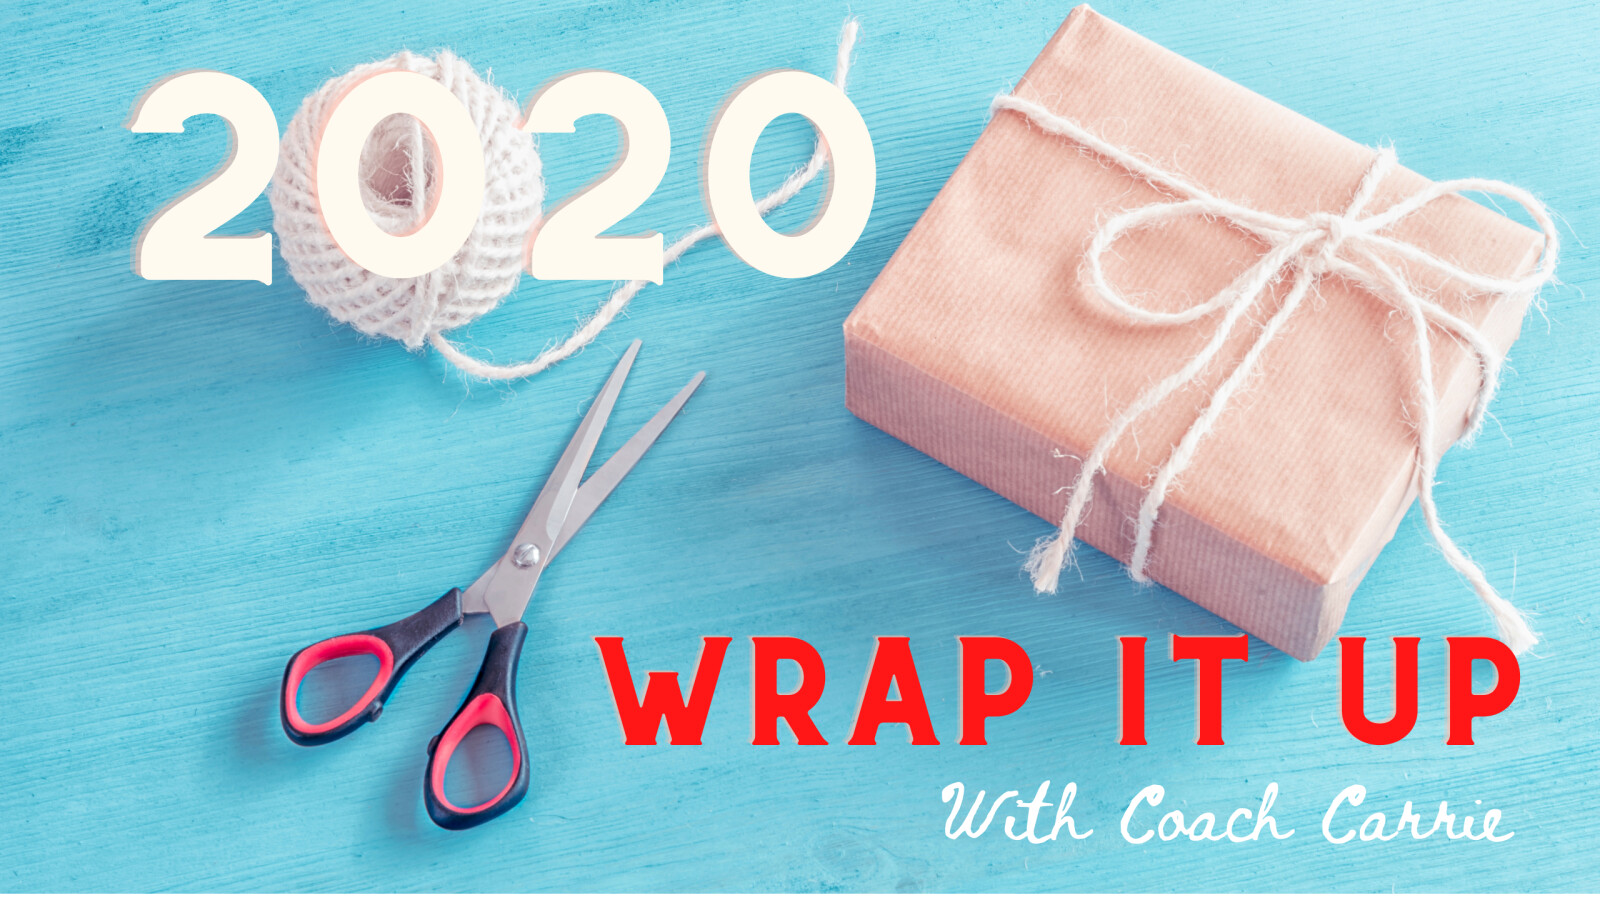 "Wrap it Up": The gift of 2020